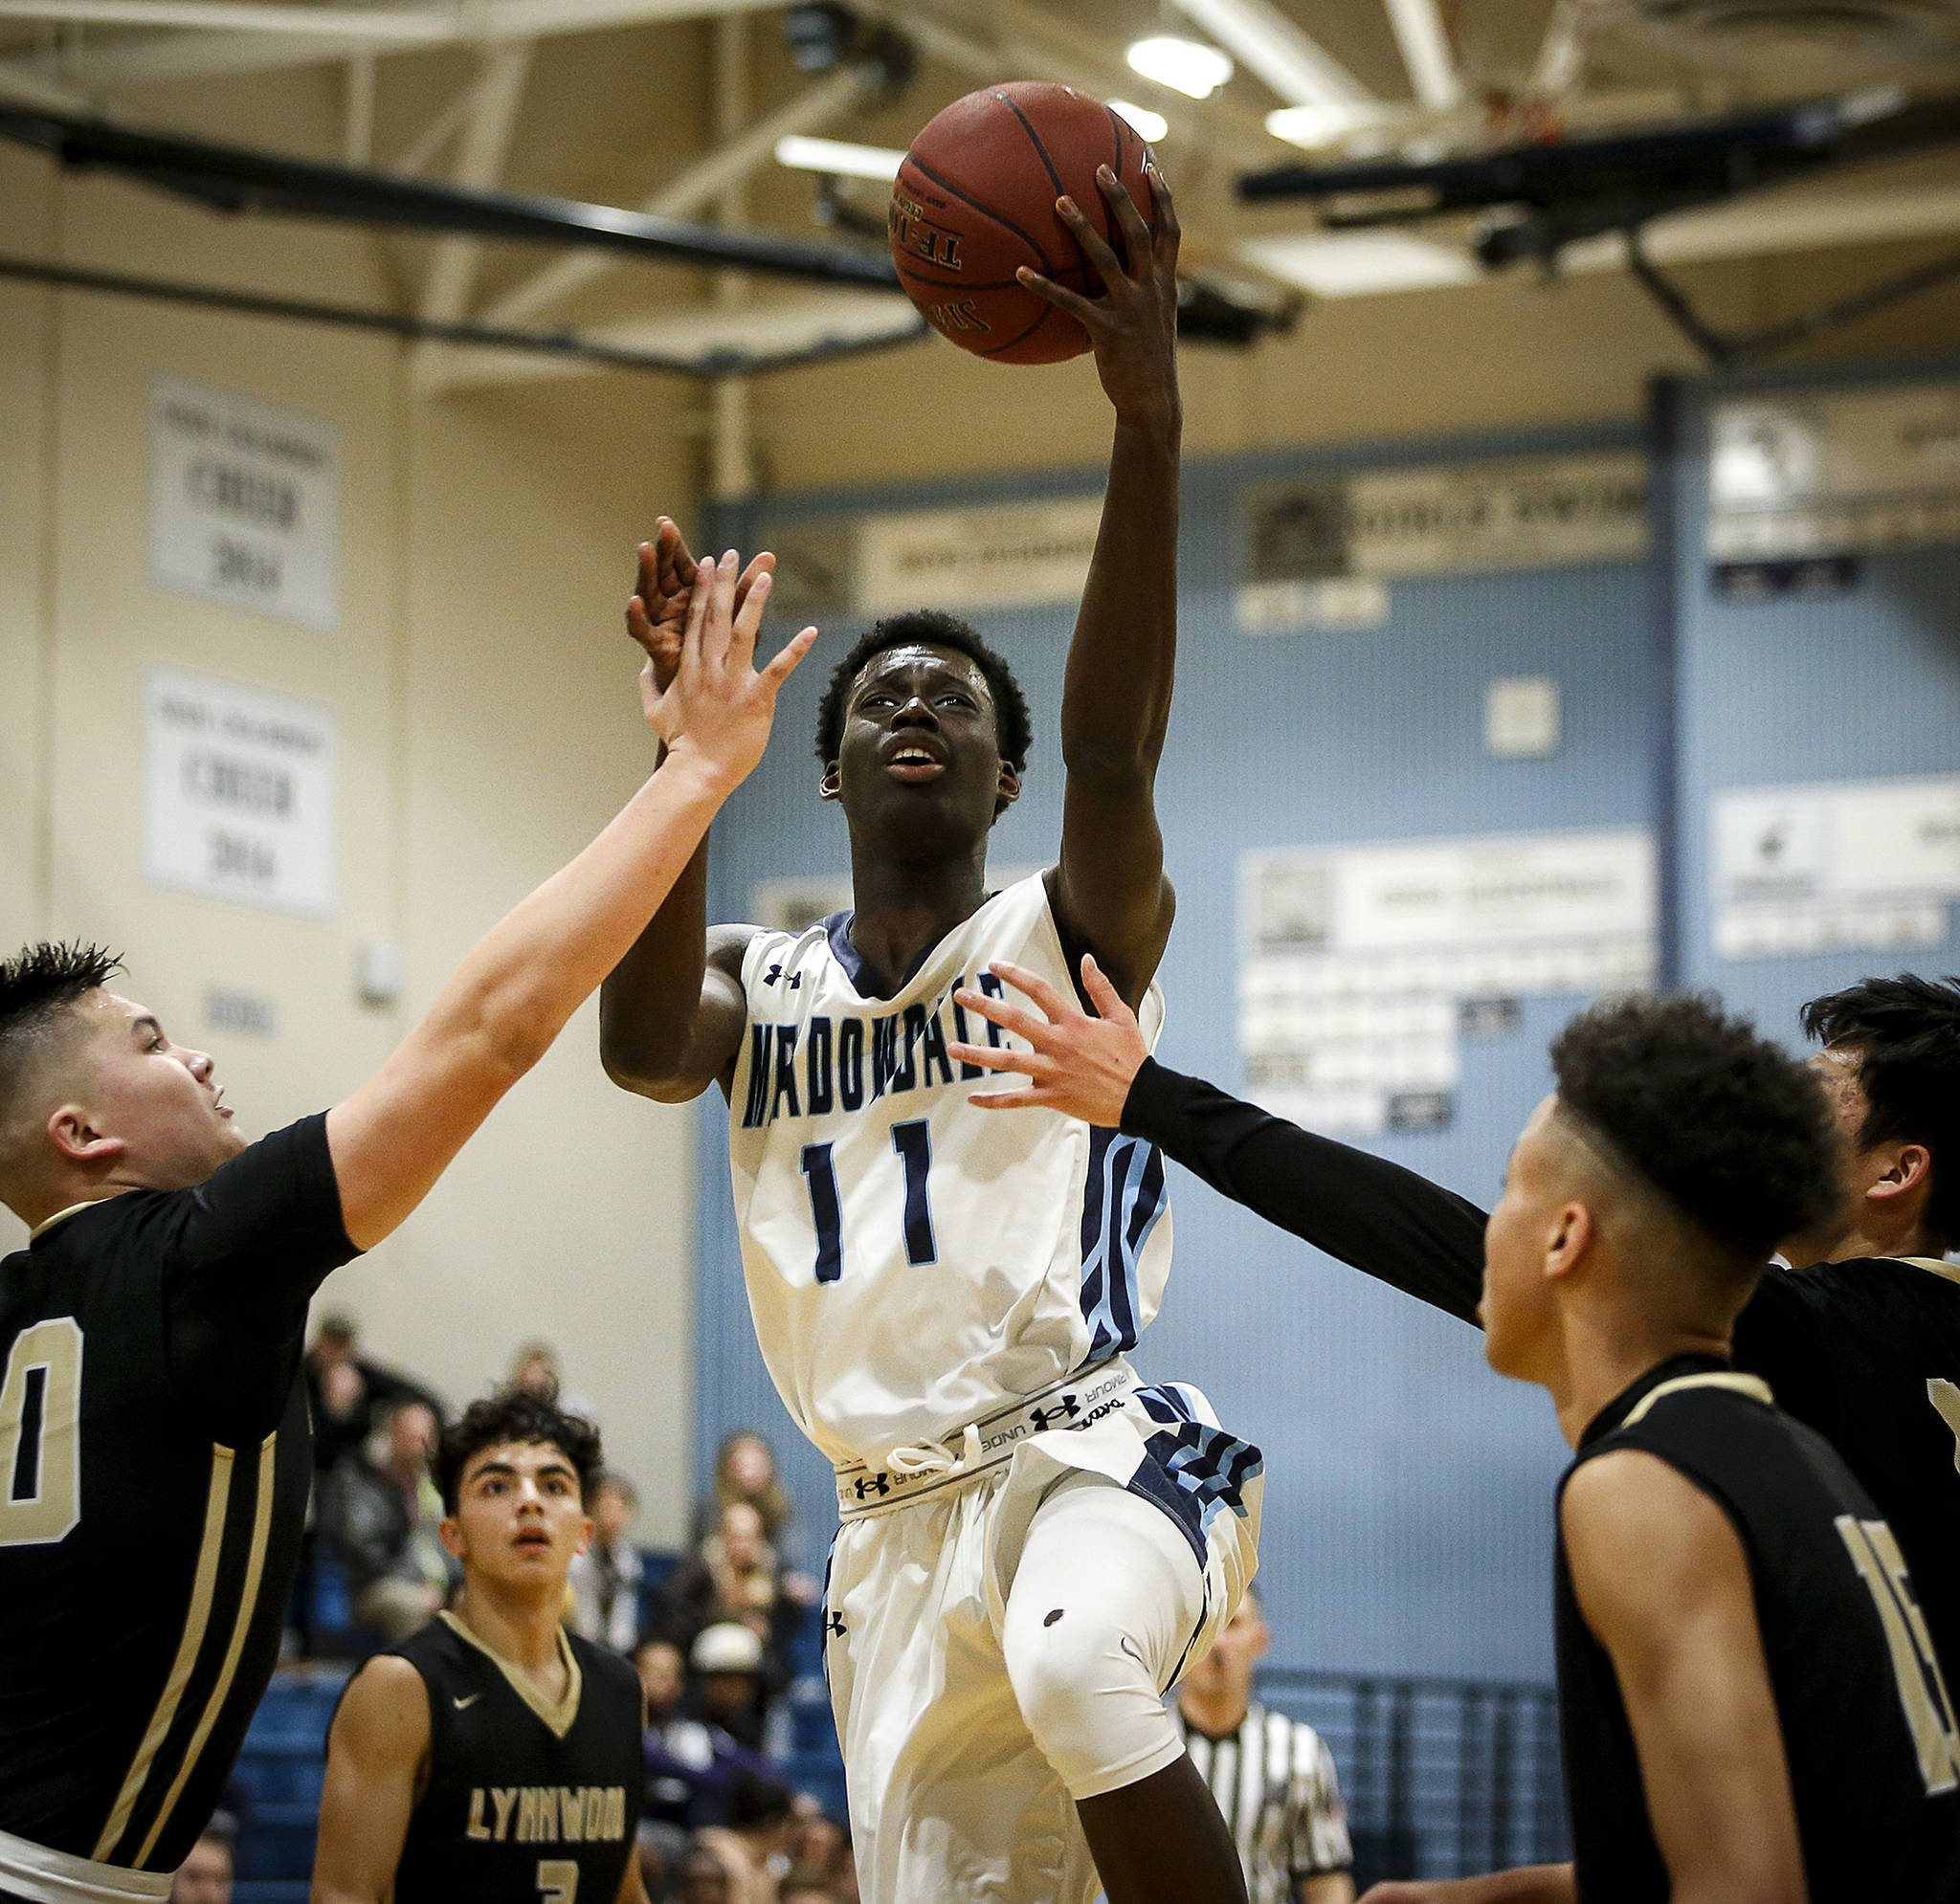 Meadowdale’s Mustapha Sonko (center) drives through a host of Lynnwood defenders for a layup during a game on Jan. 16, 2018, at Meadowdale High School in Lynnwood. (Ian Terry / The Herald)